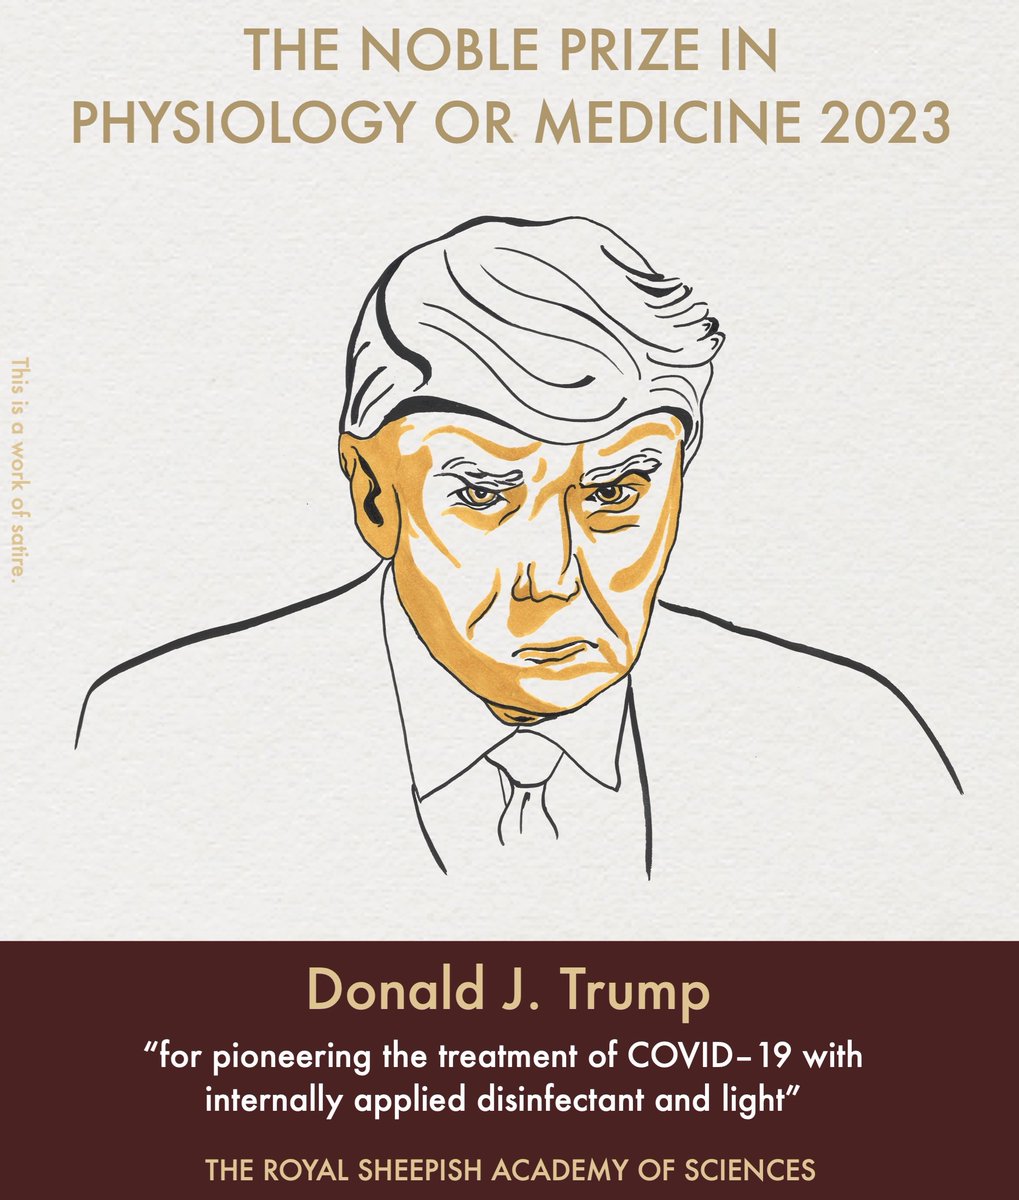 Just announced: Donald Trump has received the 2023 Noble Prize in Physiology or Medicine for the treatment of COVID-19 with disinfectant and light. Trump first proposed cleansing the body of the virus by injecting disinfectant in 2020, and recently published his findings...